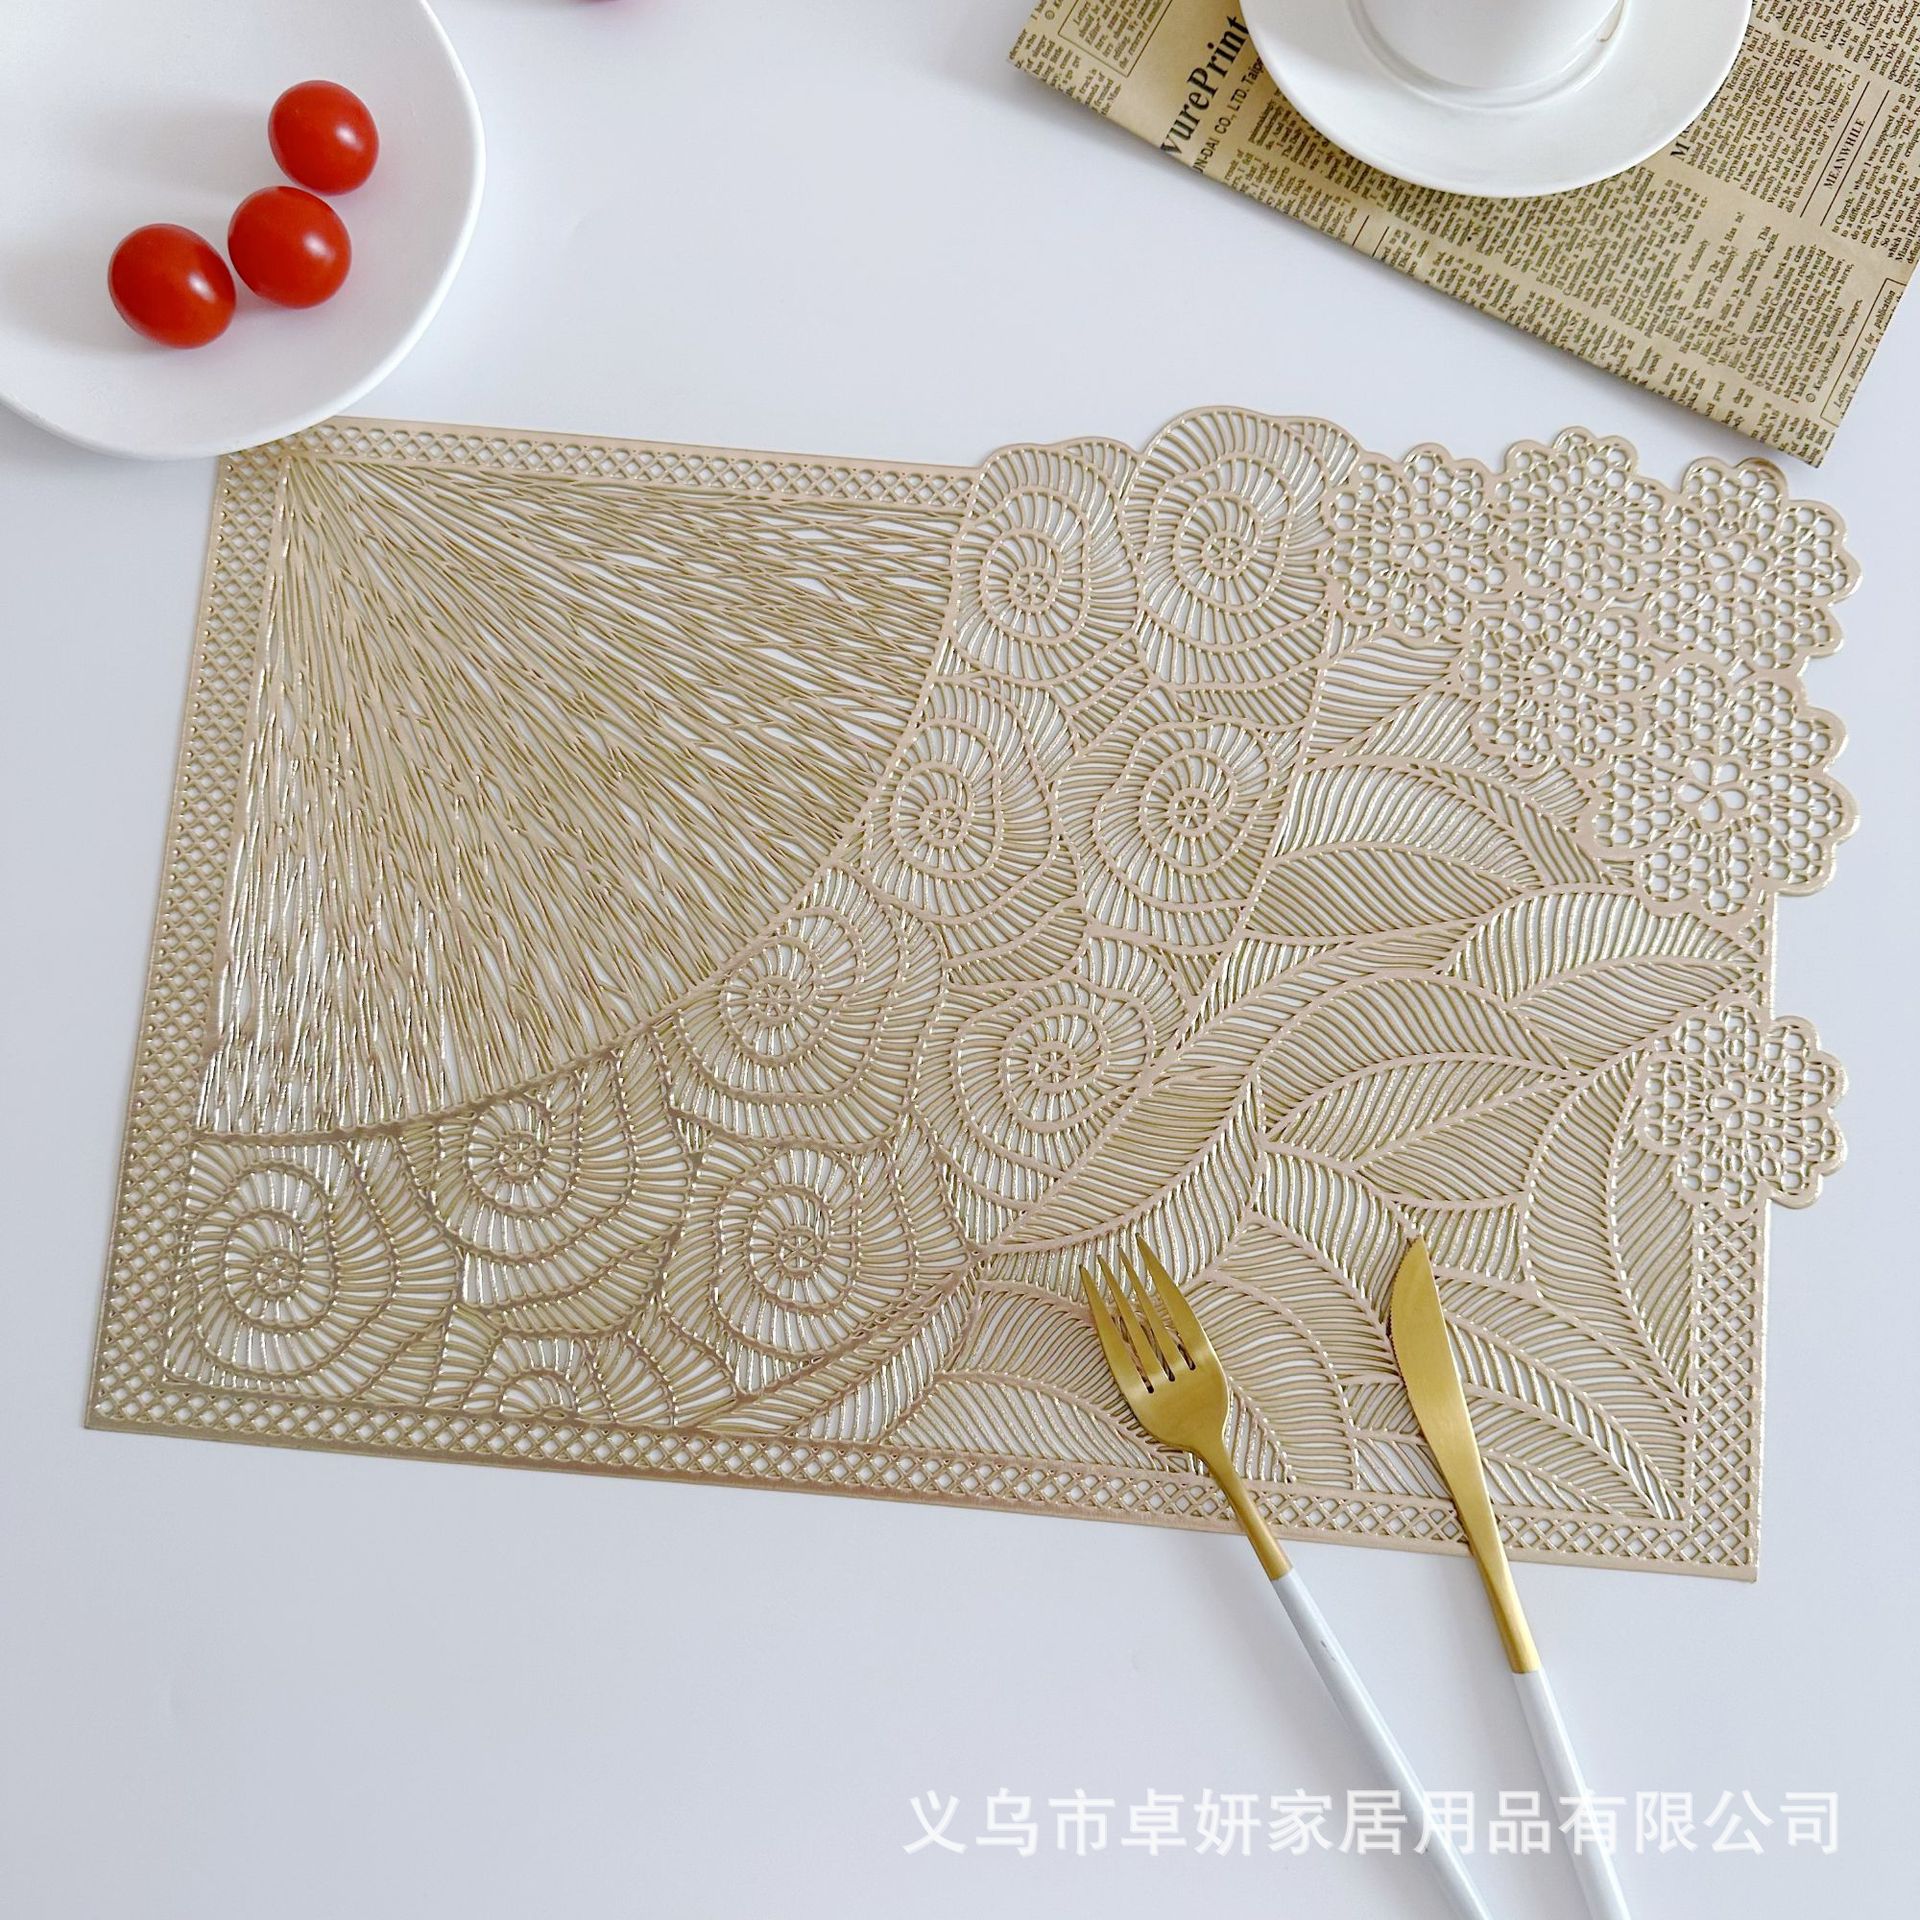 hollow placemat heat proof mat heat proof mat western-style placemat western-style placemat dining table cushion placemat direct sales simple heat insulation